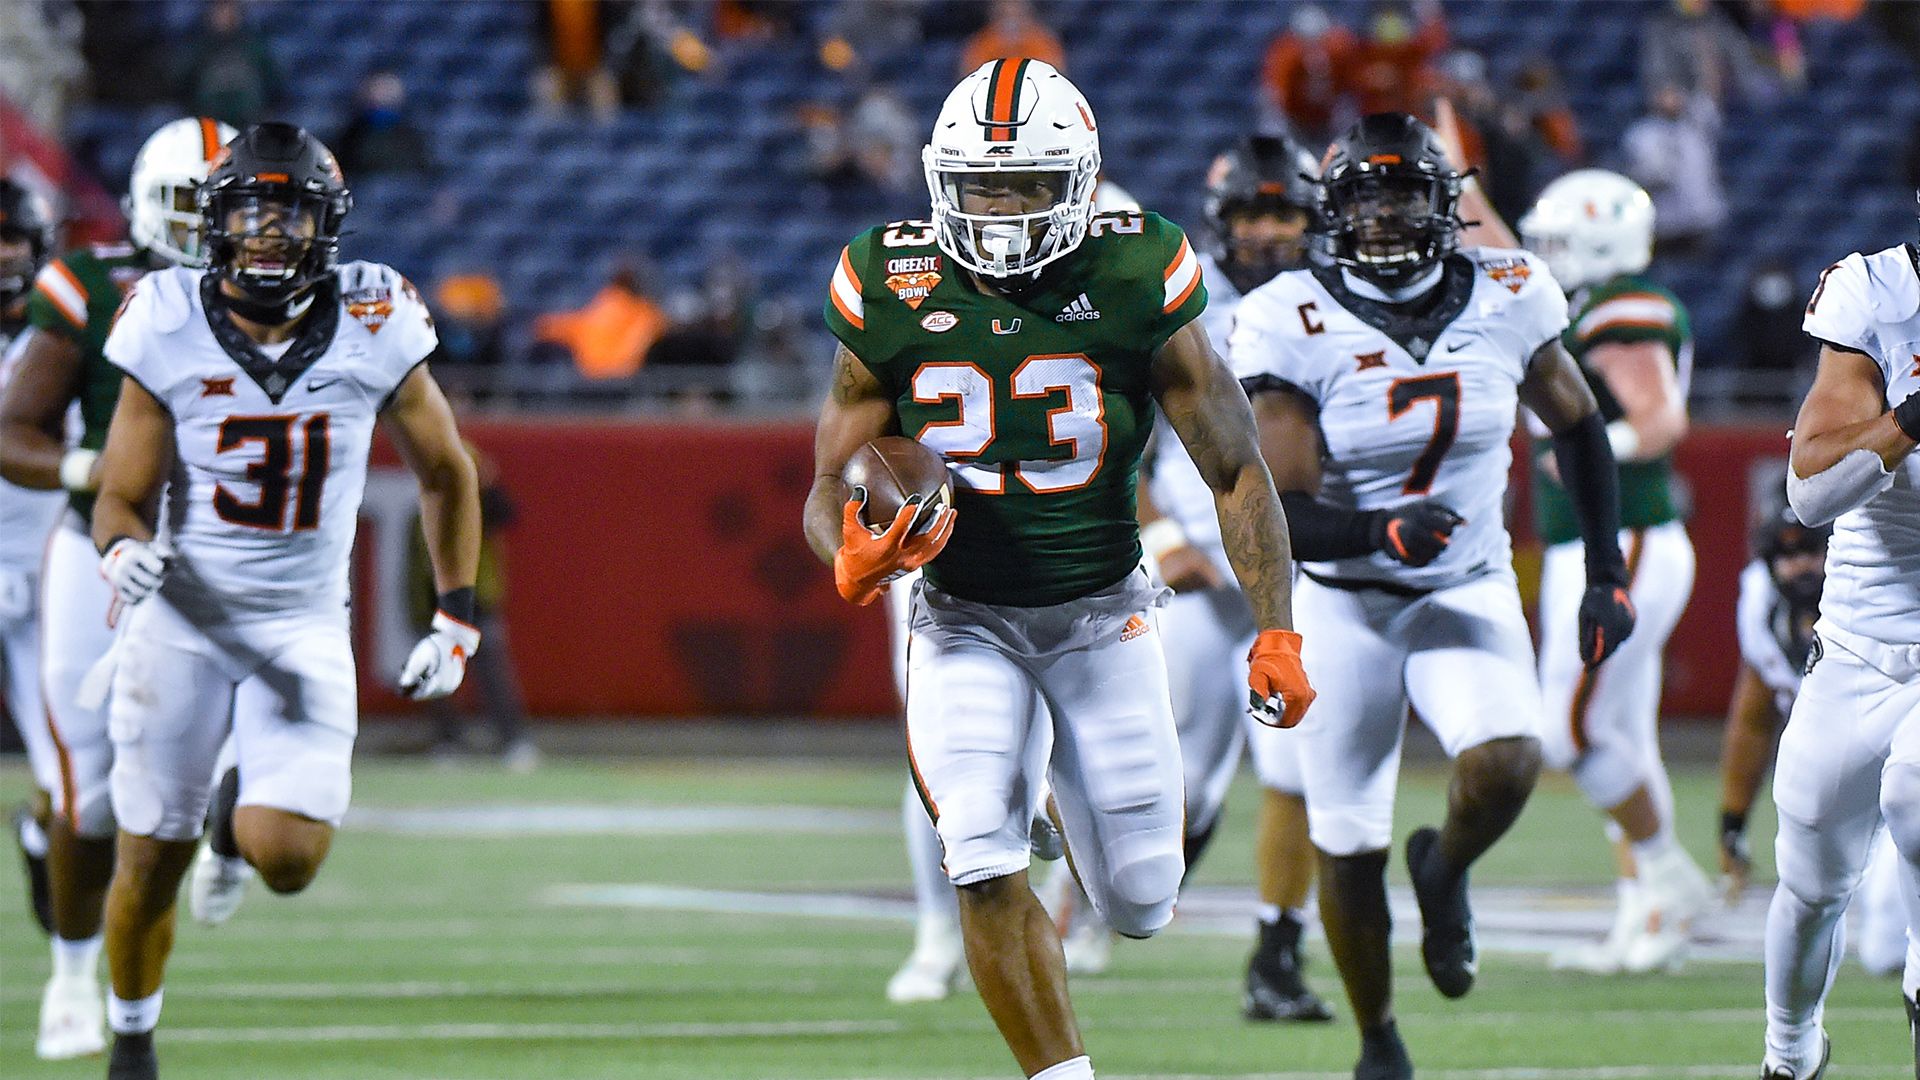 Canes Comeback Falls Short in Cheez-It Bowl